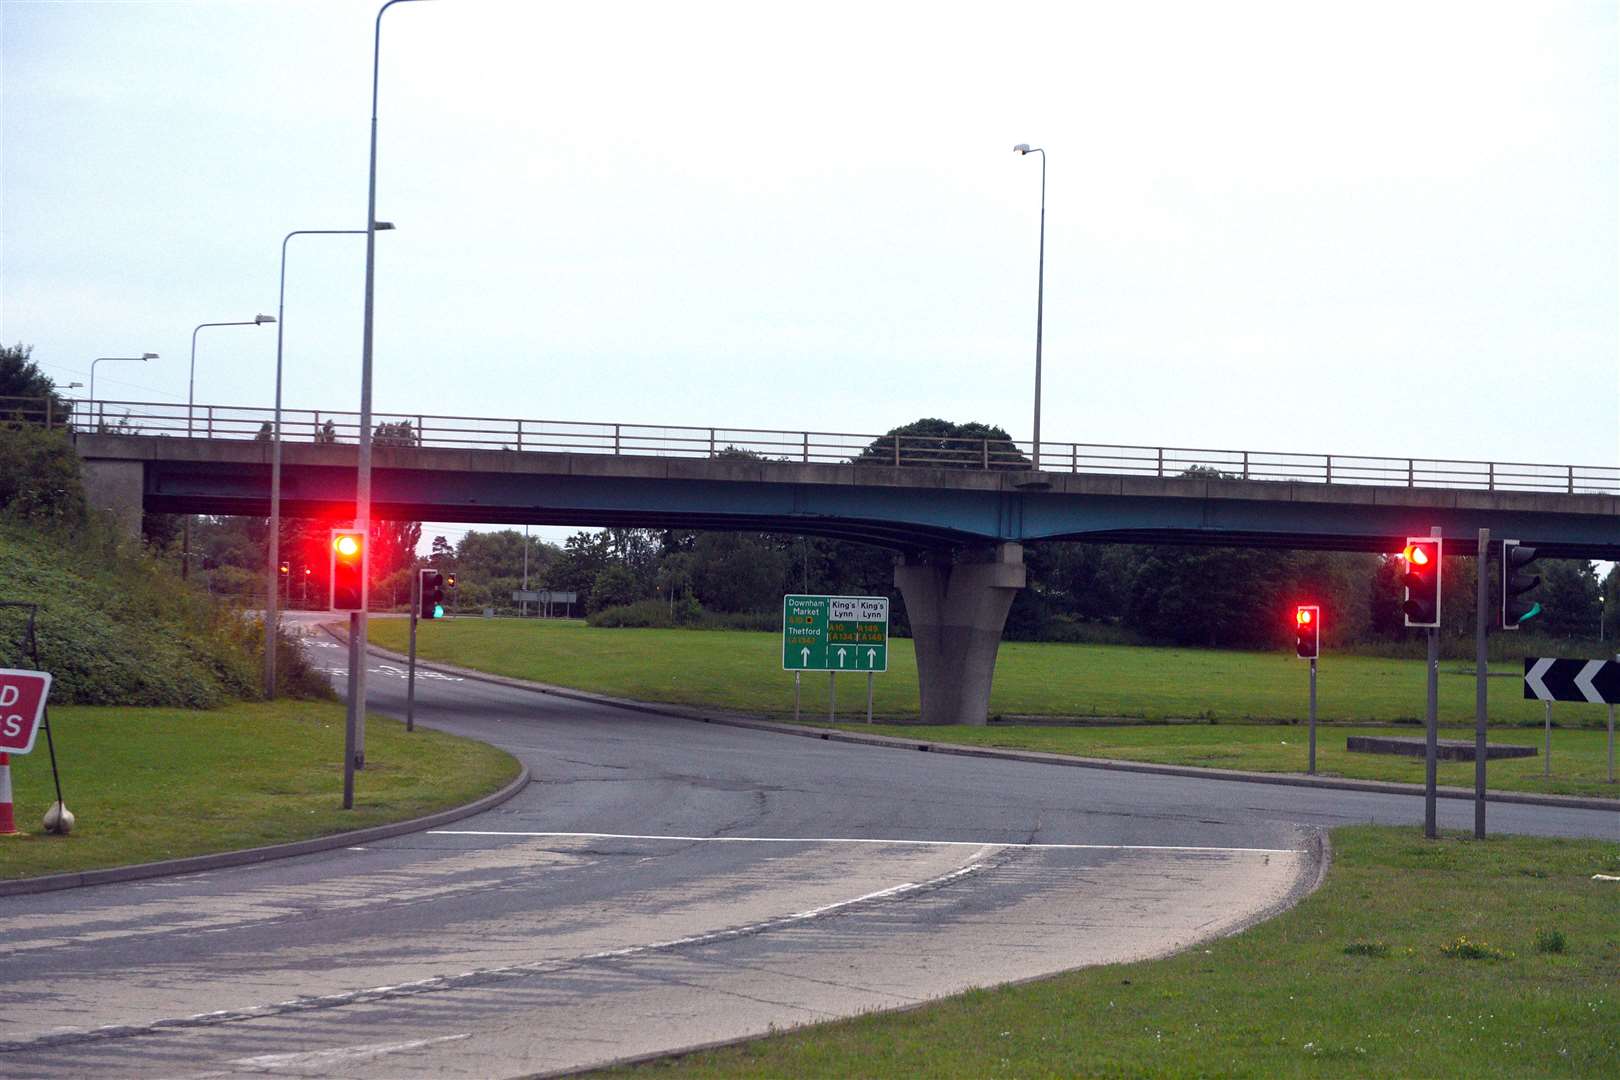 The Hardwick roundabout in King's Lynn